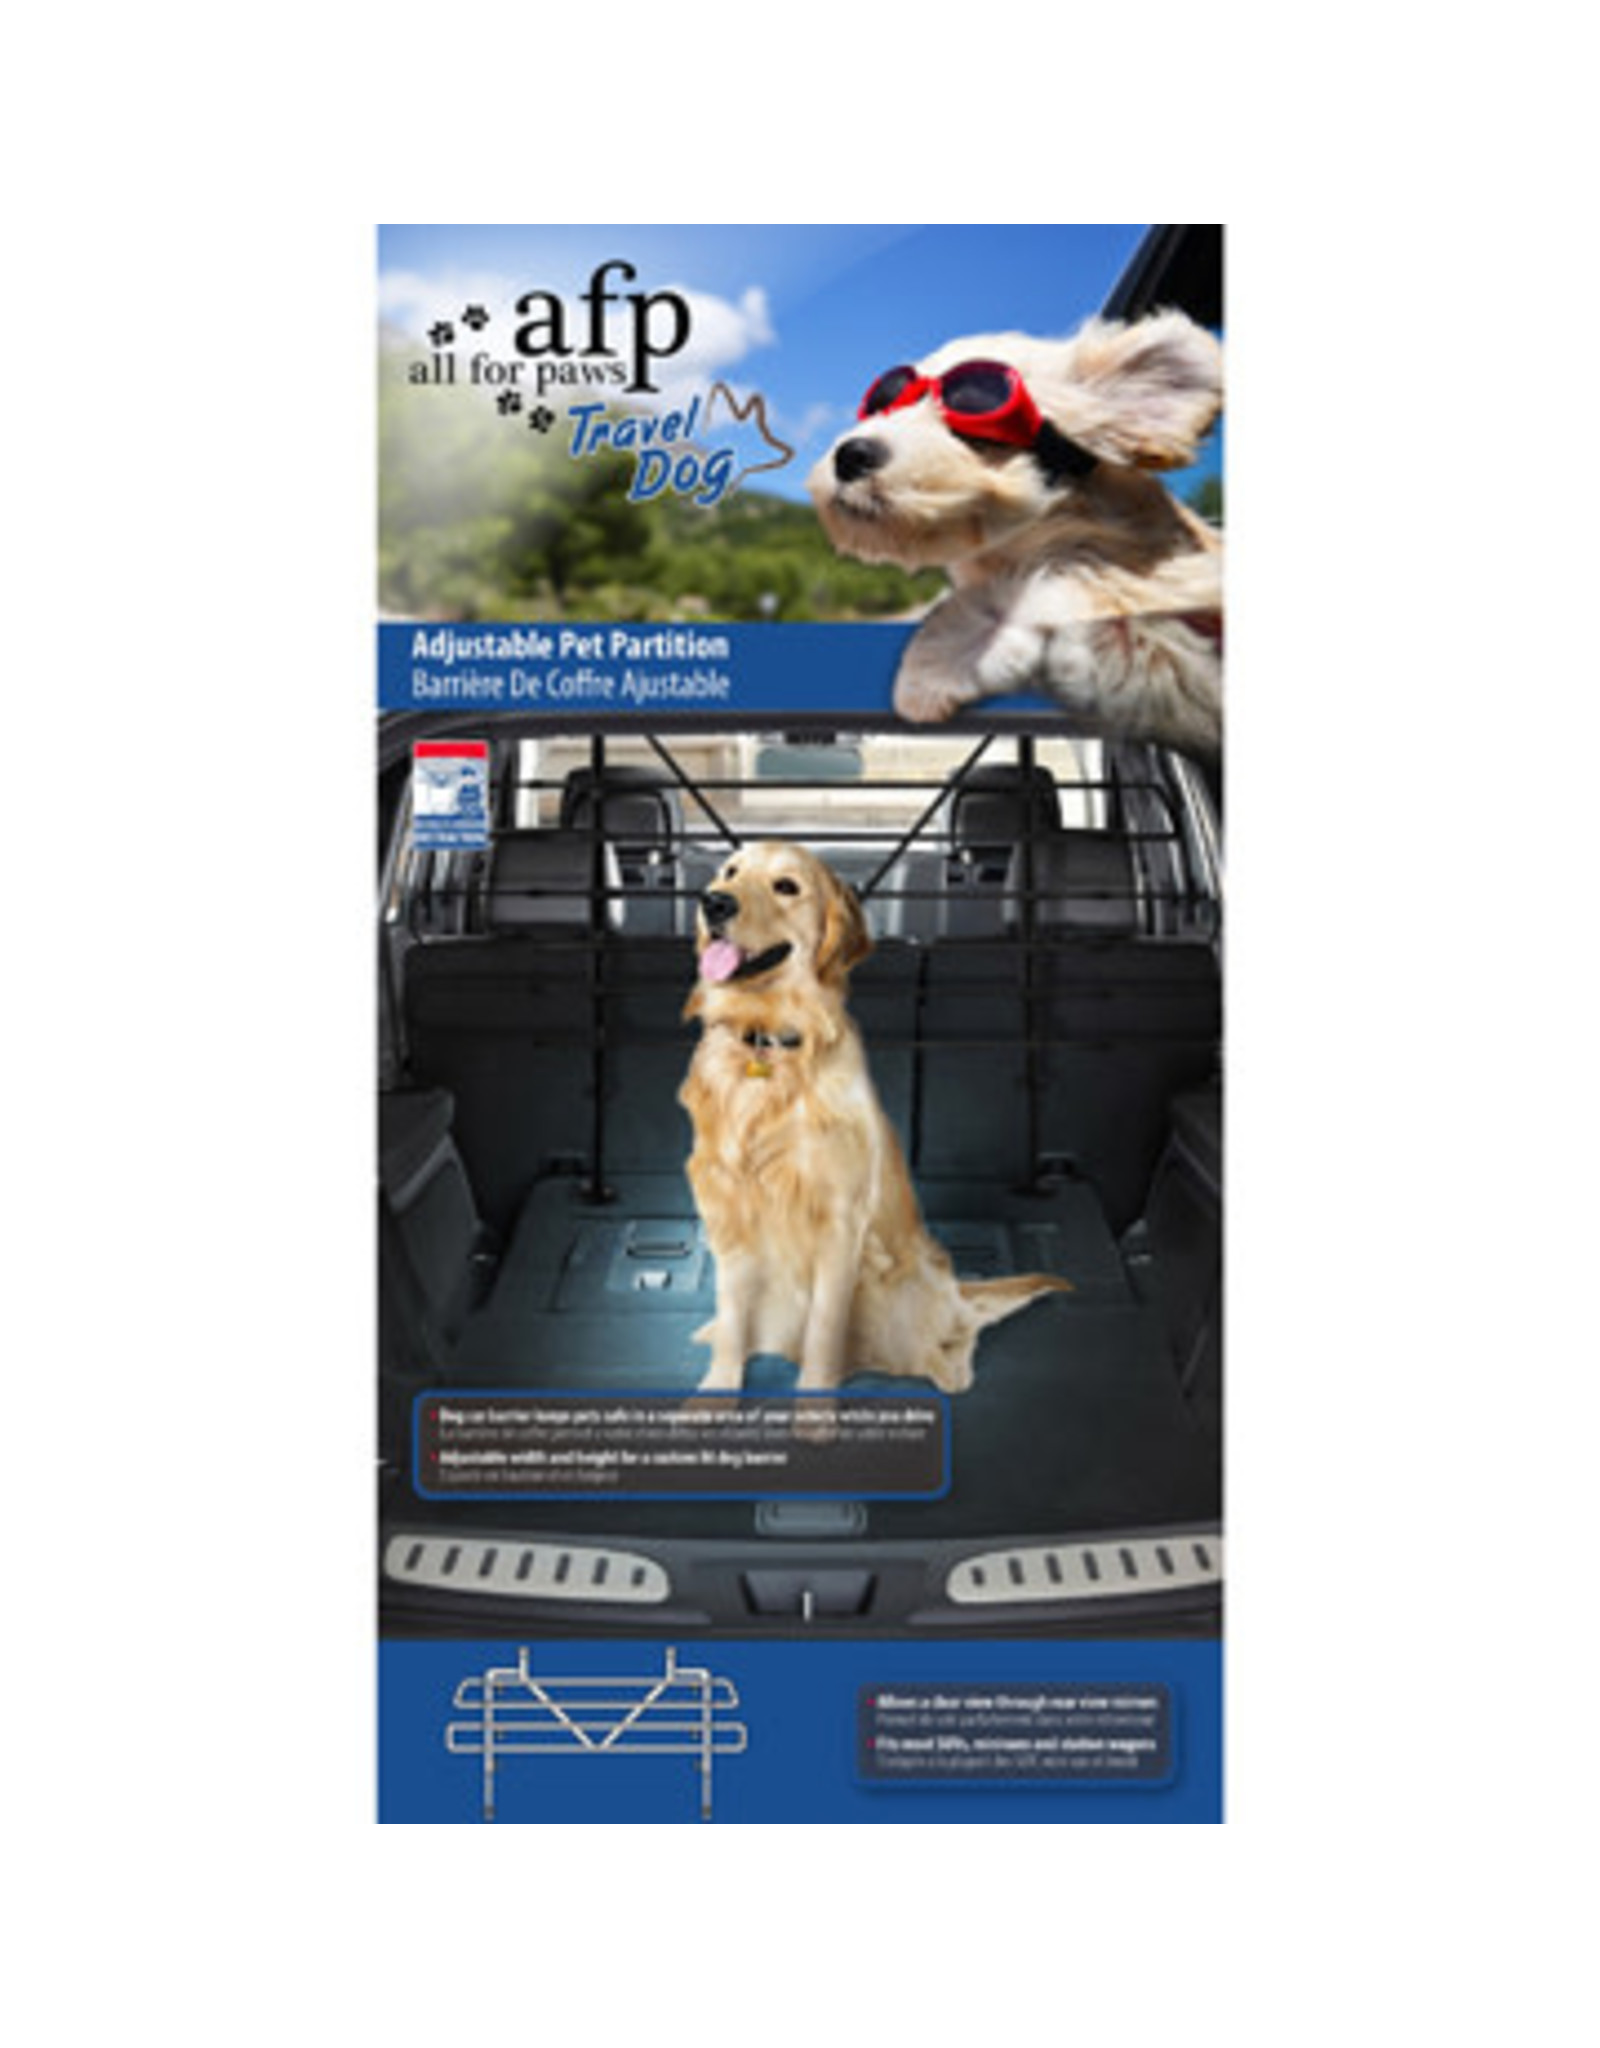 All for Paws Travel Dog Adjustable Pet Partition